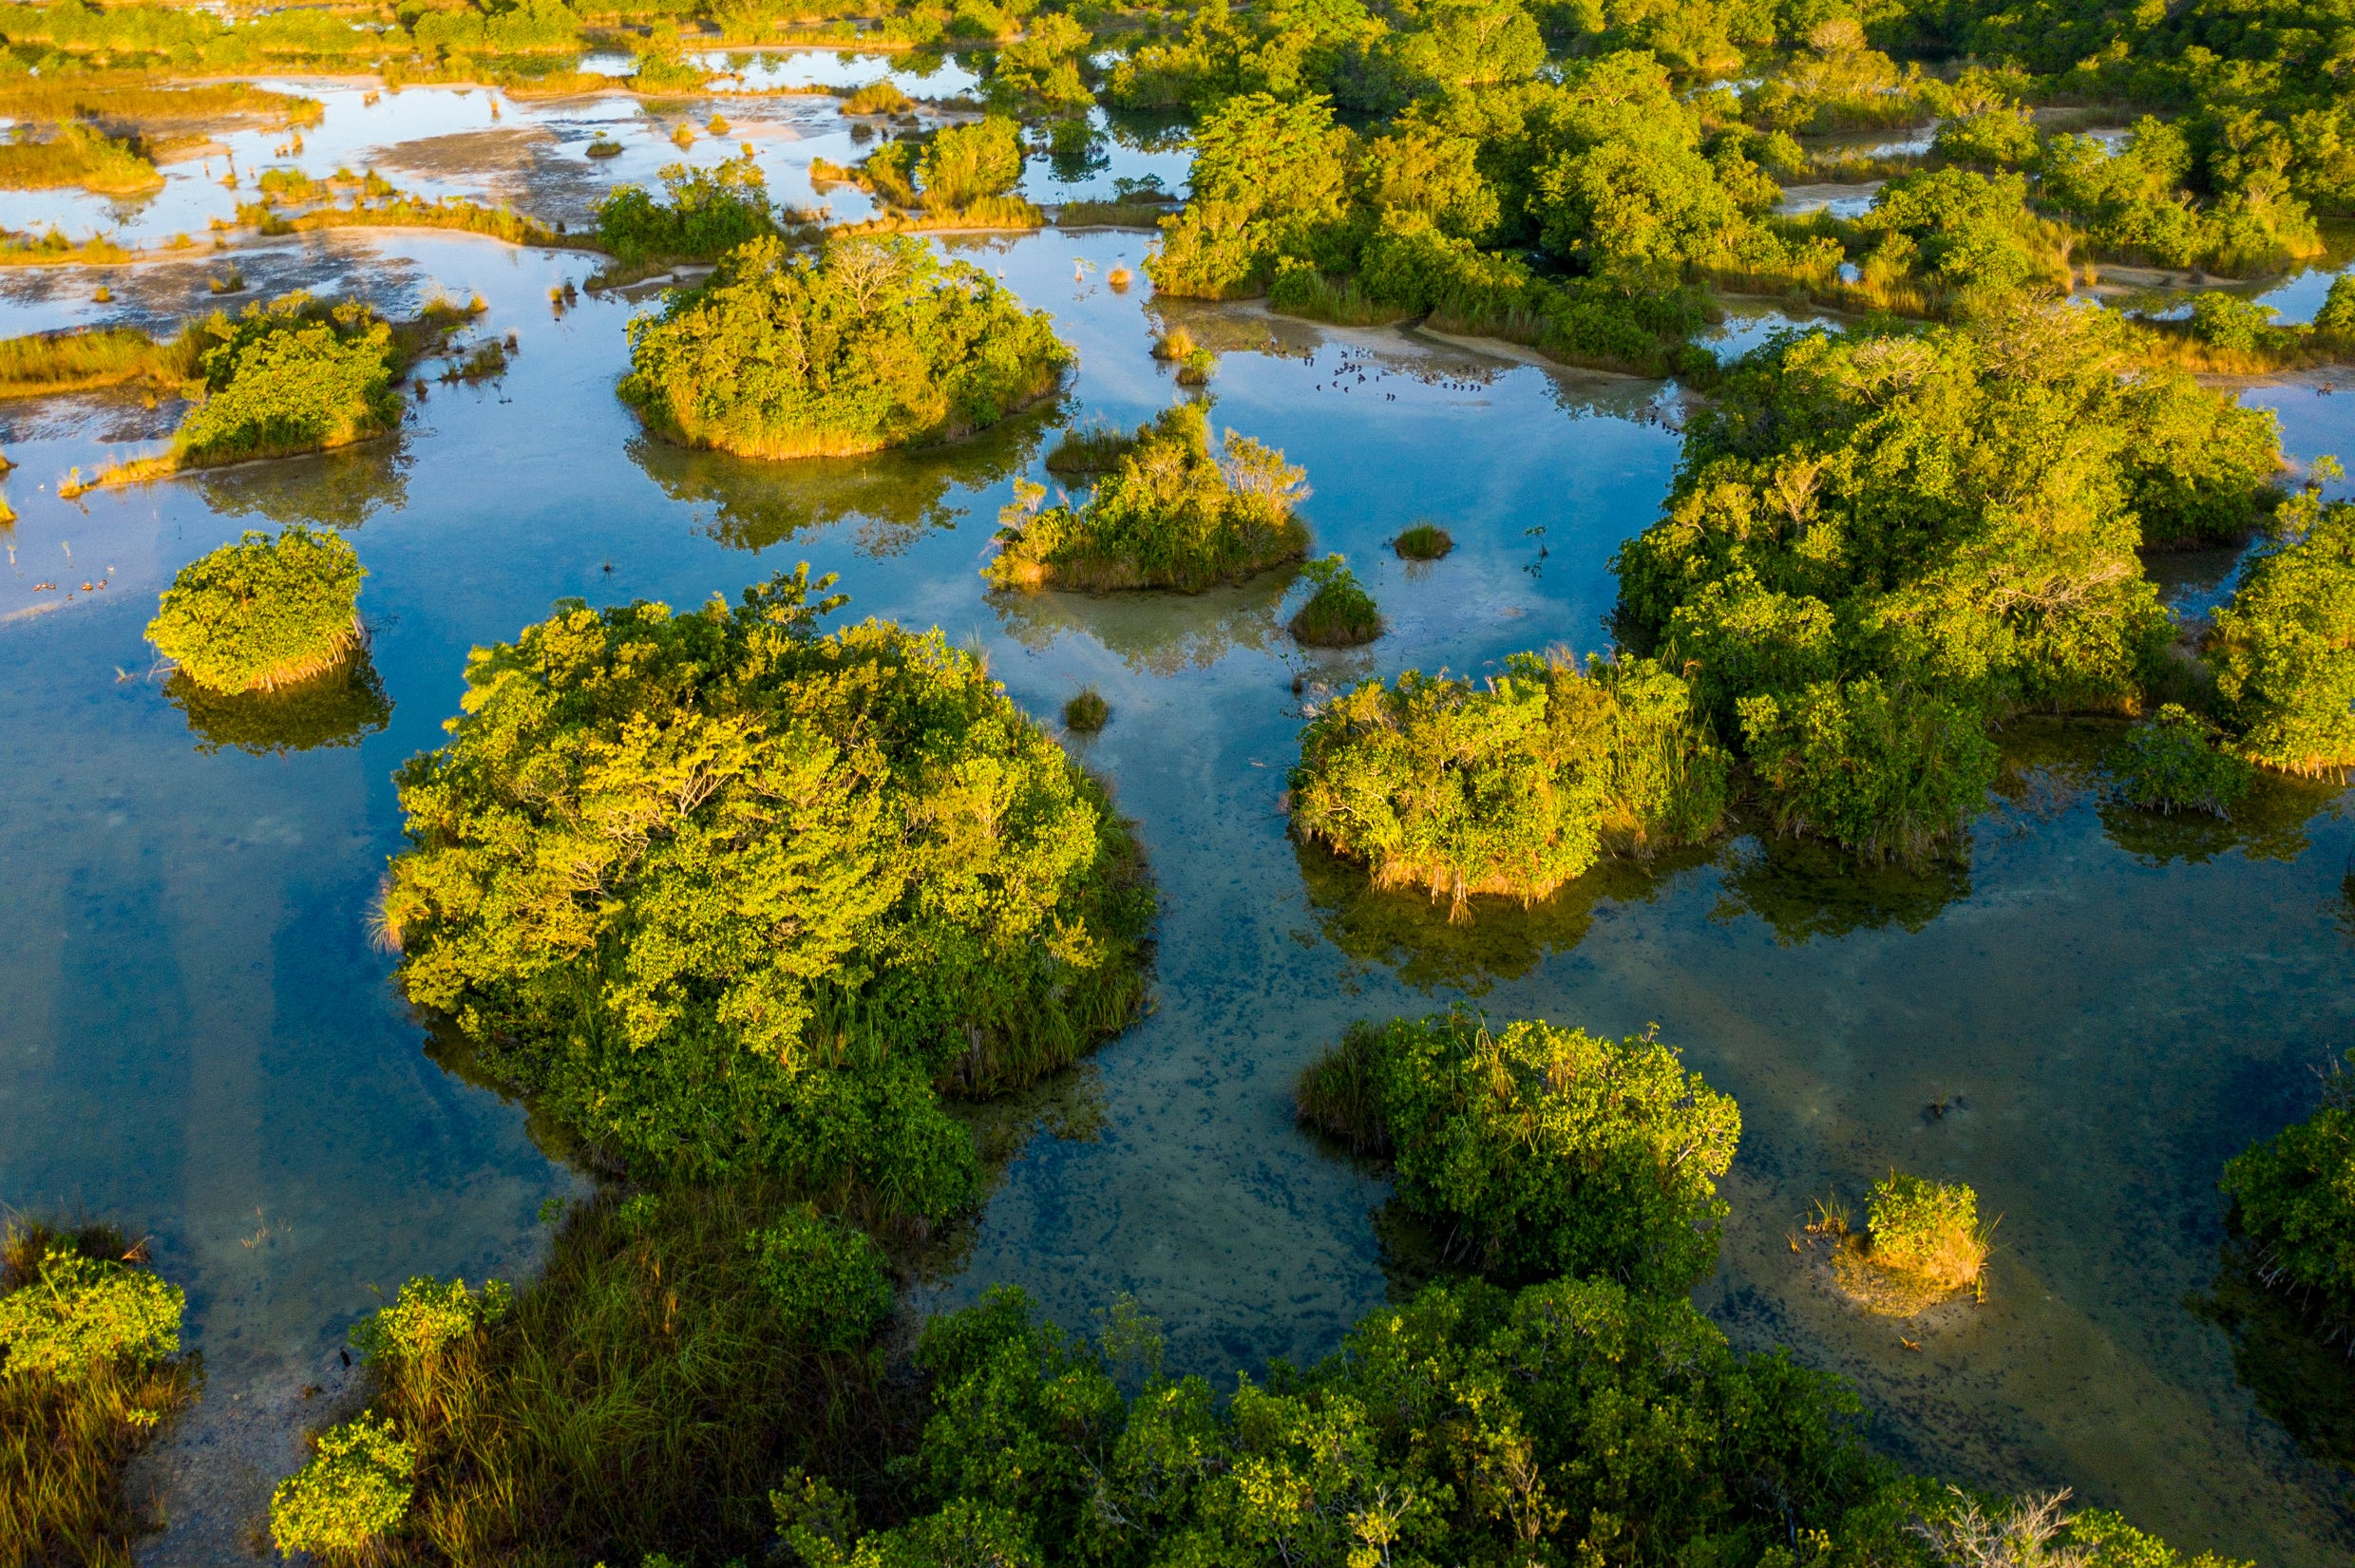  Aerial view of the red mangrove forests along the San Pedro Mártir River in Mexico. (Photo: Octavio Aburto)